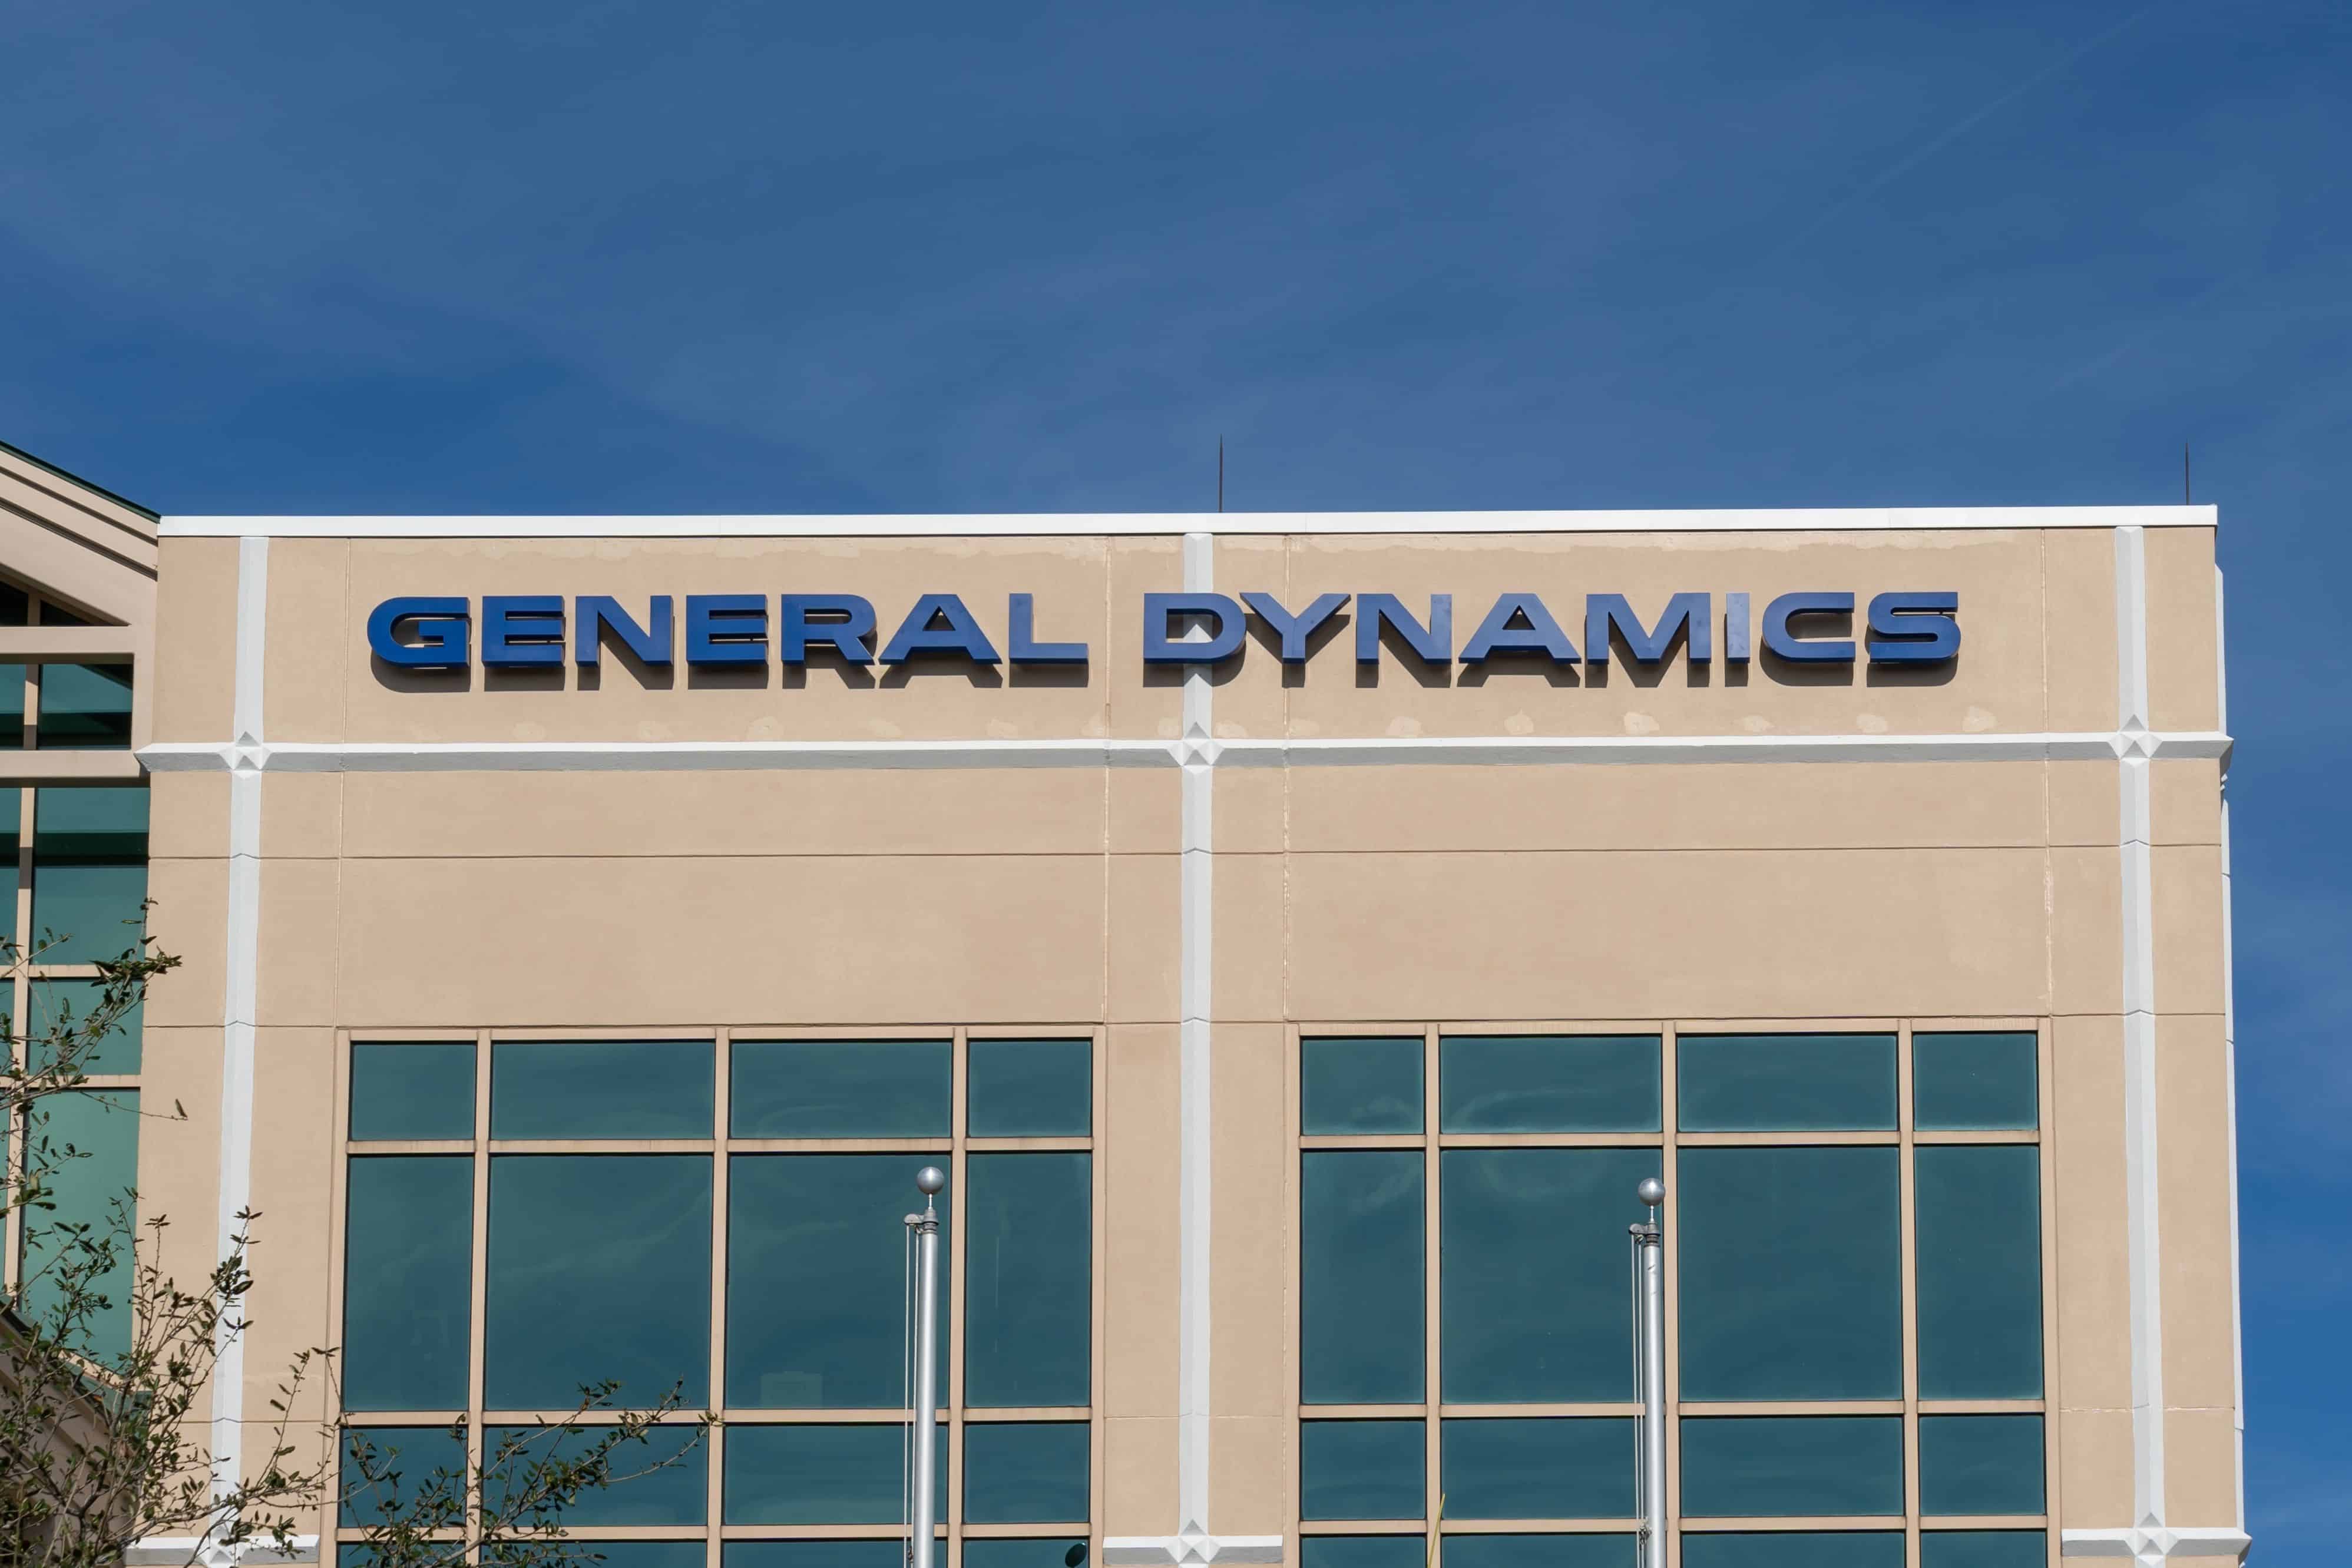 Saint Petersburg, FL, USA - January 8, 2022: General Dynamics sign on the building in Saint Petersburg, FL, USA. General Dynamics Corporation is an American aerospace and defense corporation.